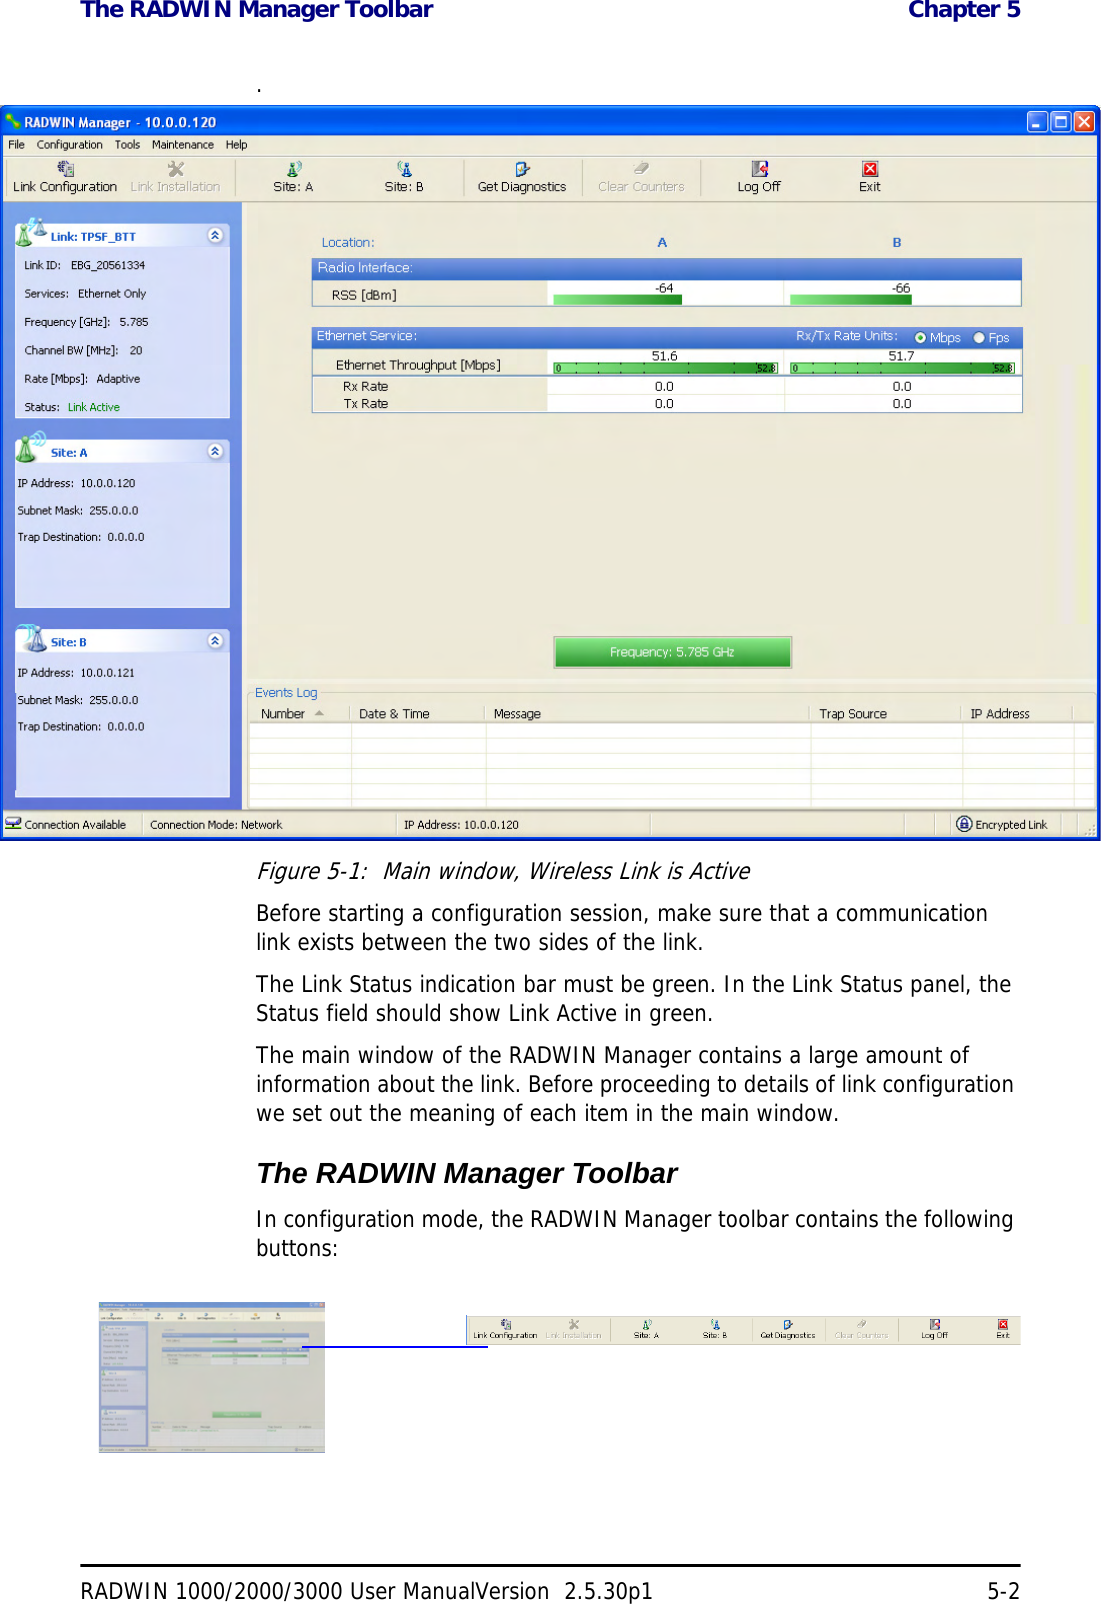 The RADWIN Manager Toolbar  Chapter 5RADWIN 1000/2000/3000 User ManualVersion  2.5.30p1 5-2.Figure 5-1:  Main window, Wireless Link is ActiveBefore starting a configuration session, make sure that a communication link exists between the two sides of the link.The Link Status indication bar must be green. In the Link Status panel, the Status field should show Link Active in green.The main window of the RADWIN Manager contains a large amount of information about the link. Before proceeding to details of link configuration we set out the meaning of each item in the main window.The RADWIN Manager ToolbarIn configuration mode, the RADWIN Manager toolbar contains the following buttons: